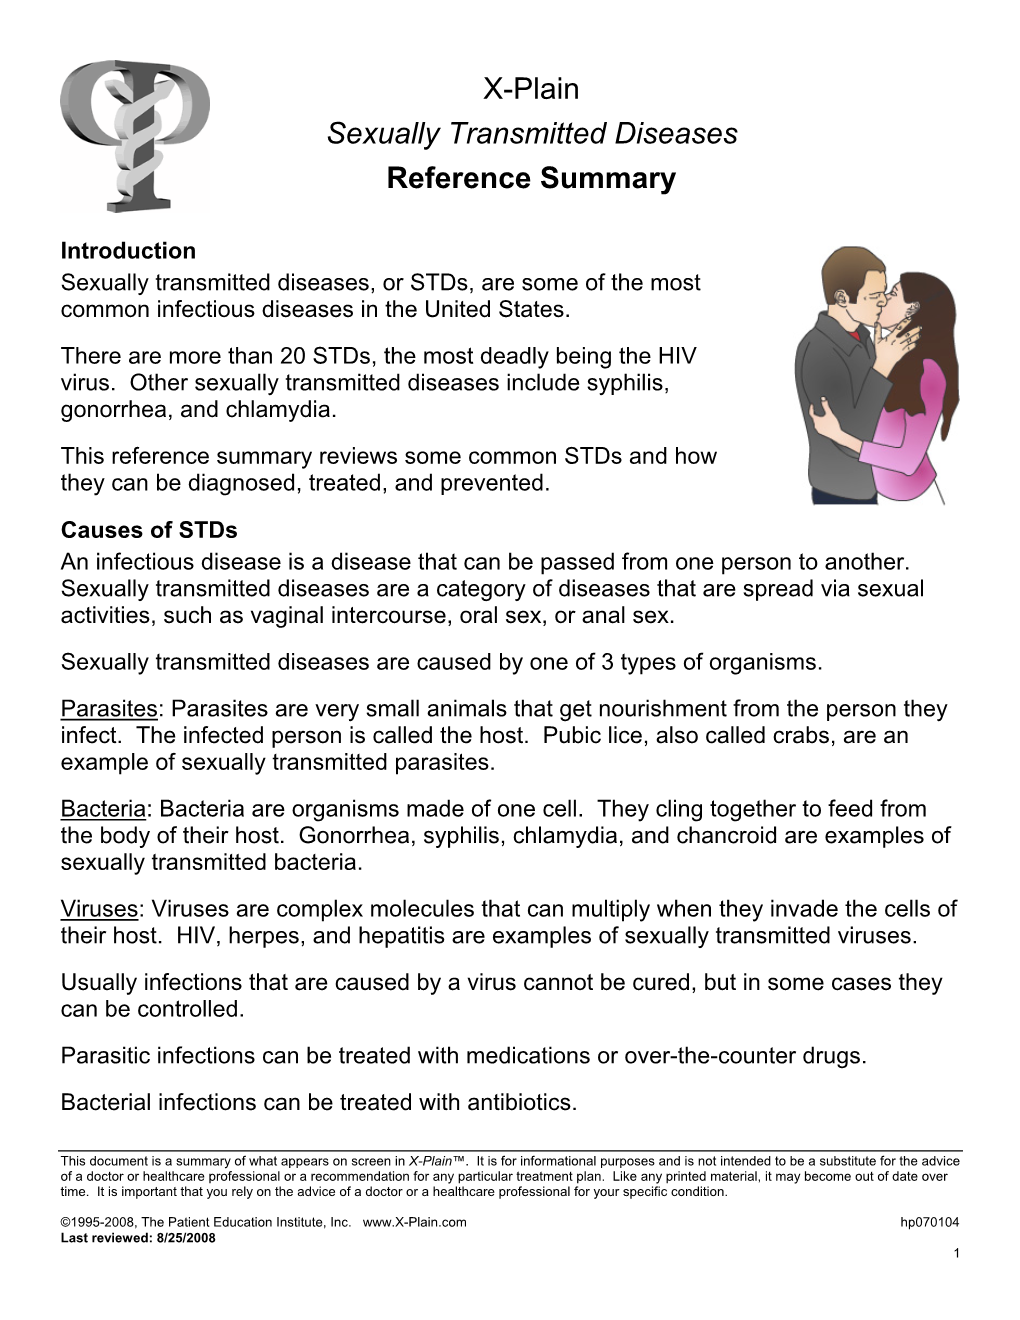 X-Plain Sexually Transmitted Diseases Reference Summary